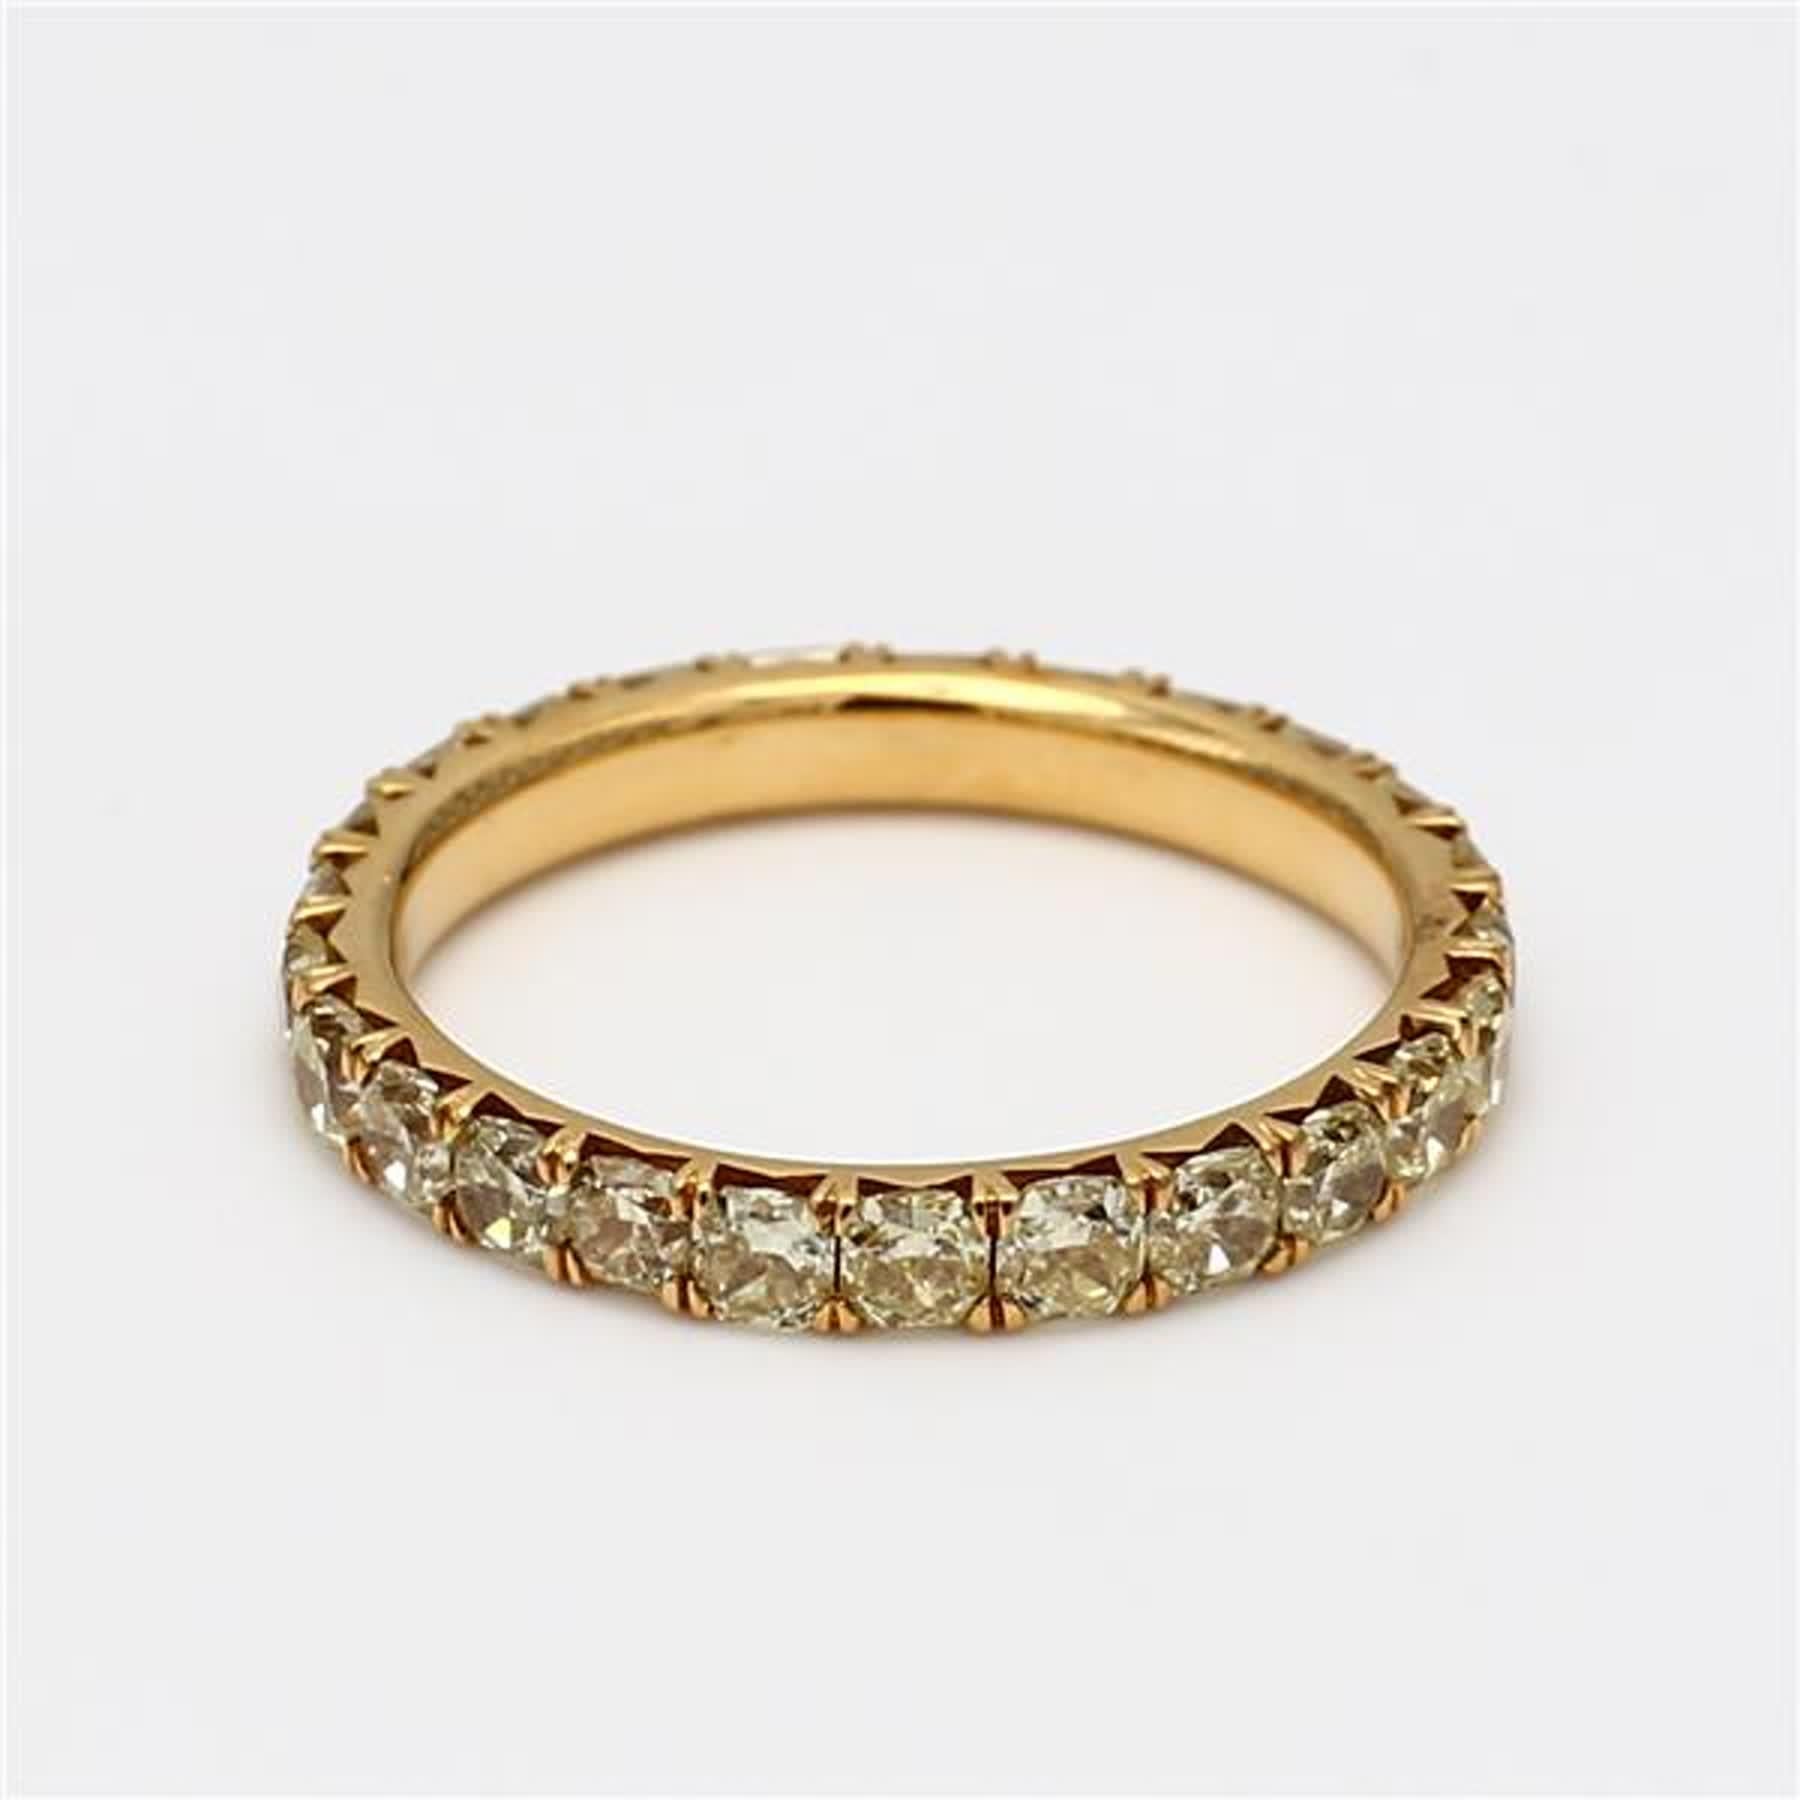 Contemporary Natural Yellow Radiant Diamond 1.91 Carat TW Yellow Gold Eternity Band